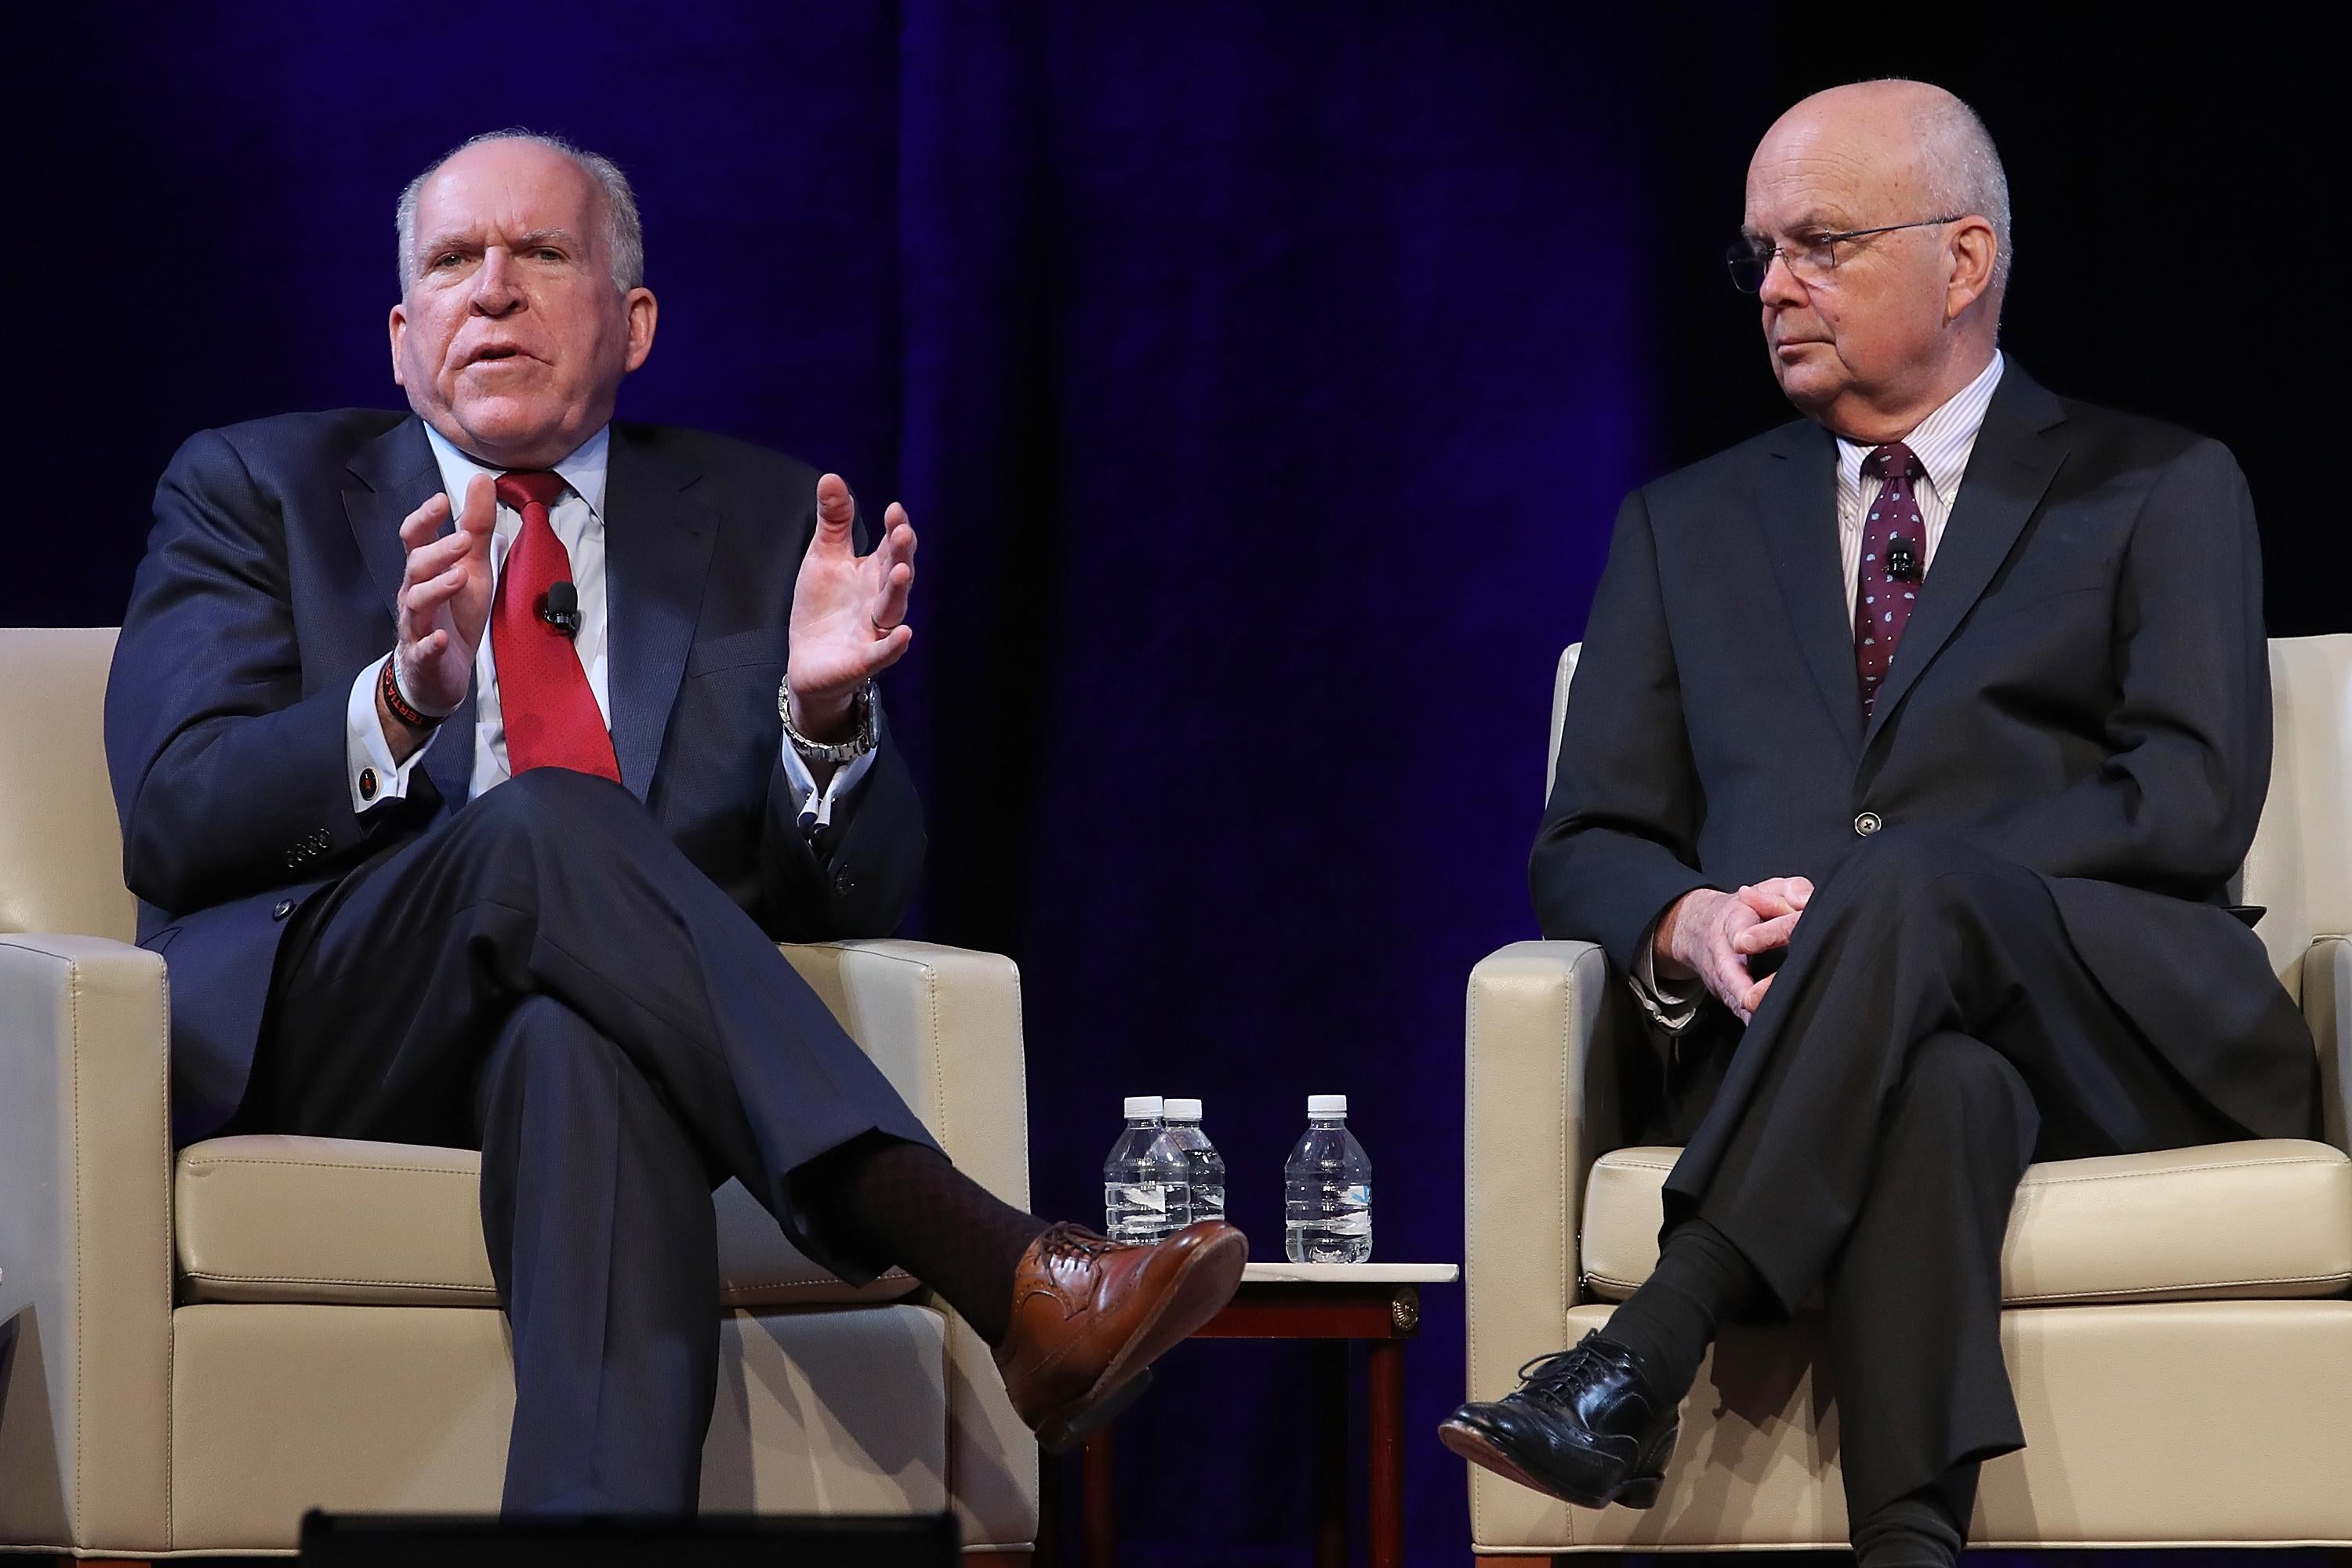 John Brennan and Michael Hayden seated in armchairs onstage.